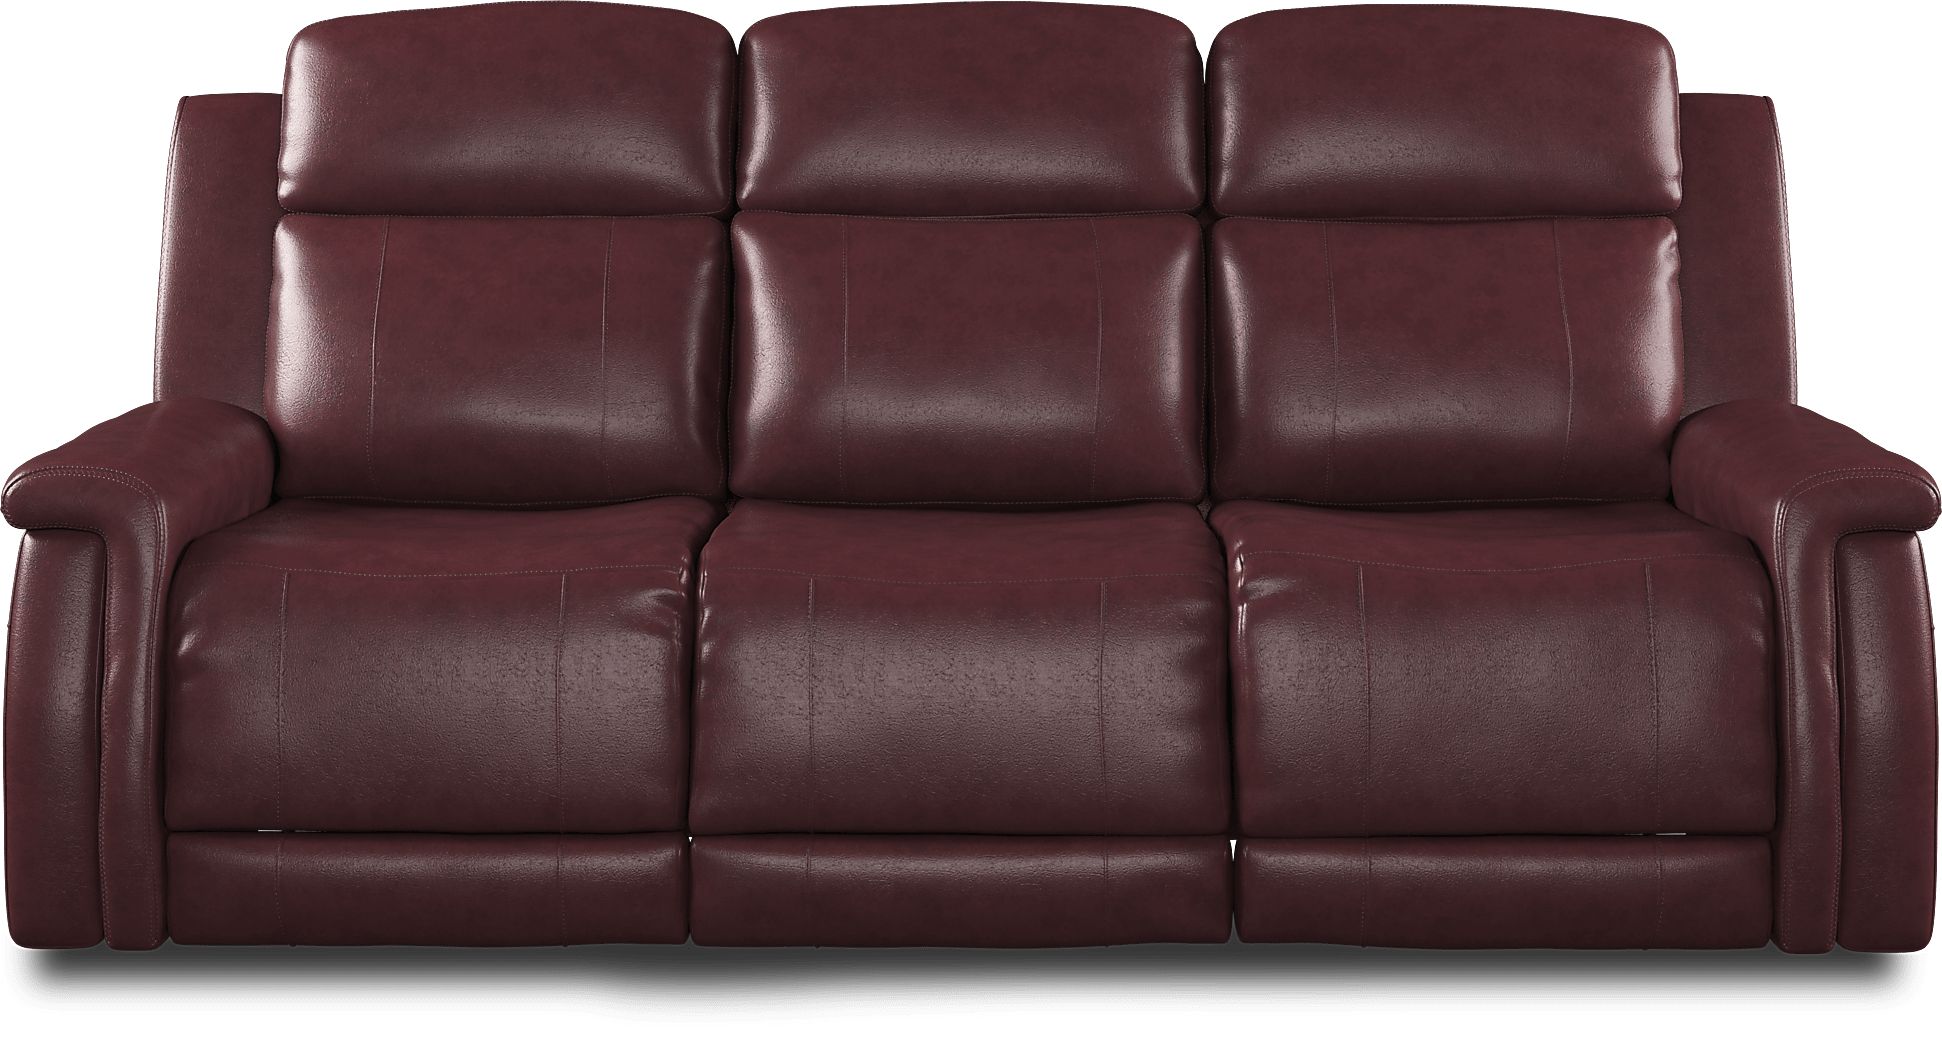 Orsini Red Leather 8 Pc Dual Power Reclining Living Room